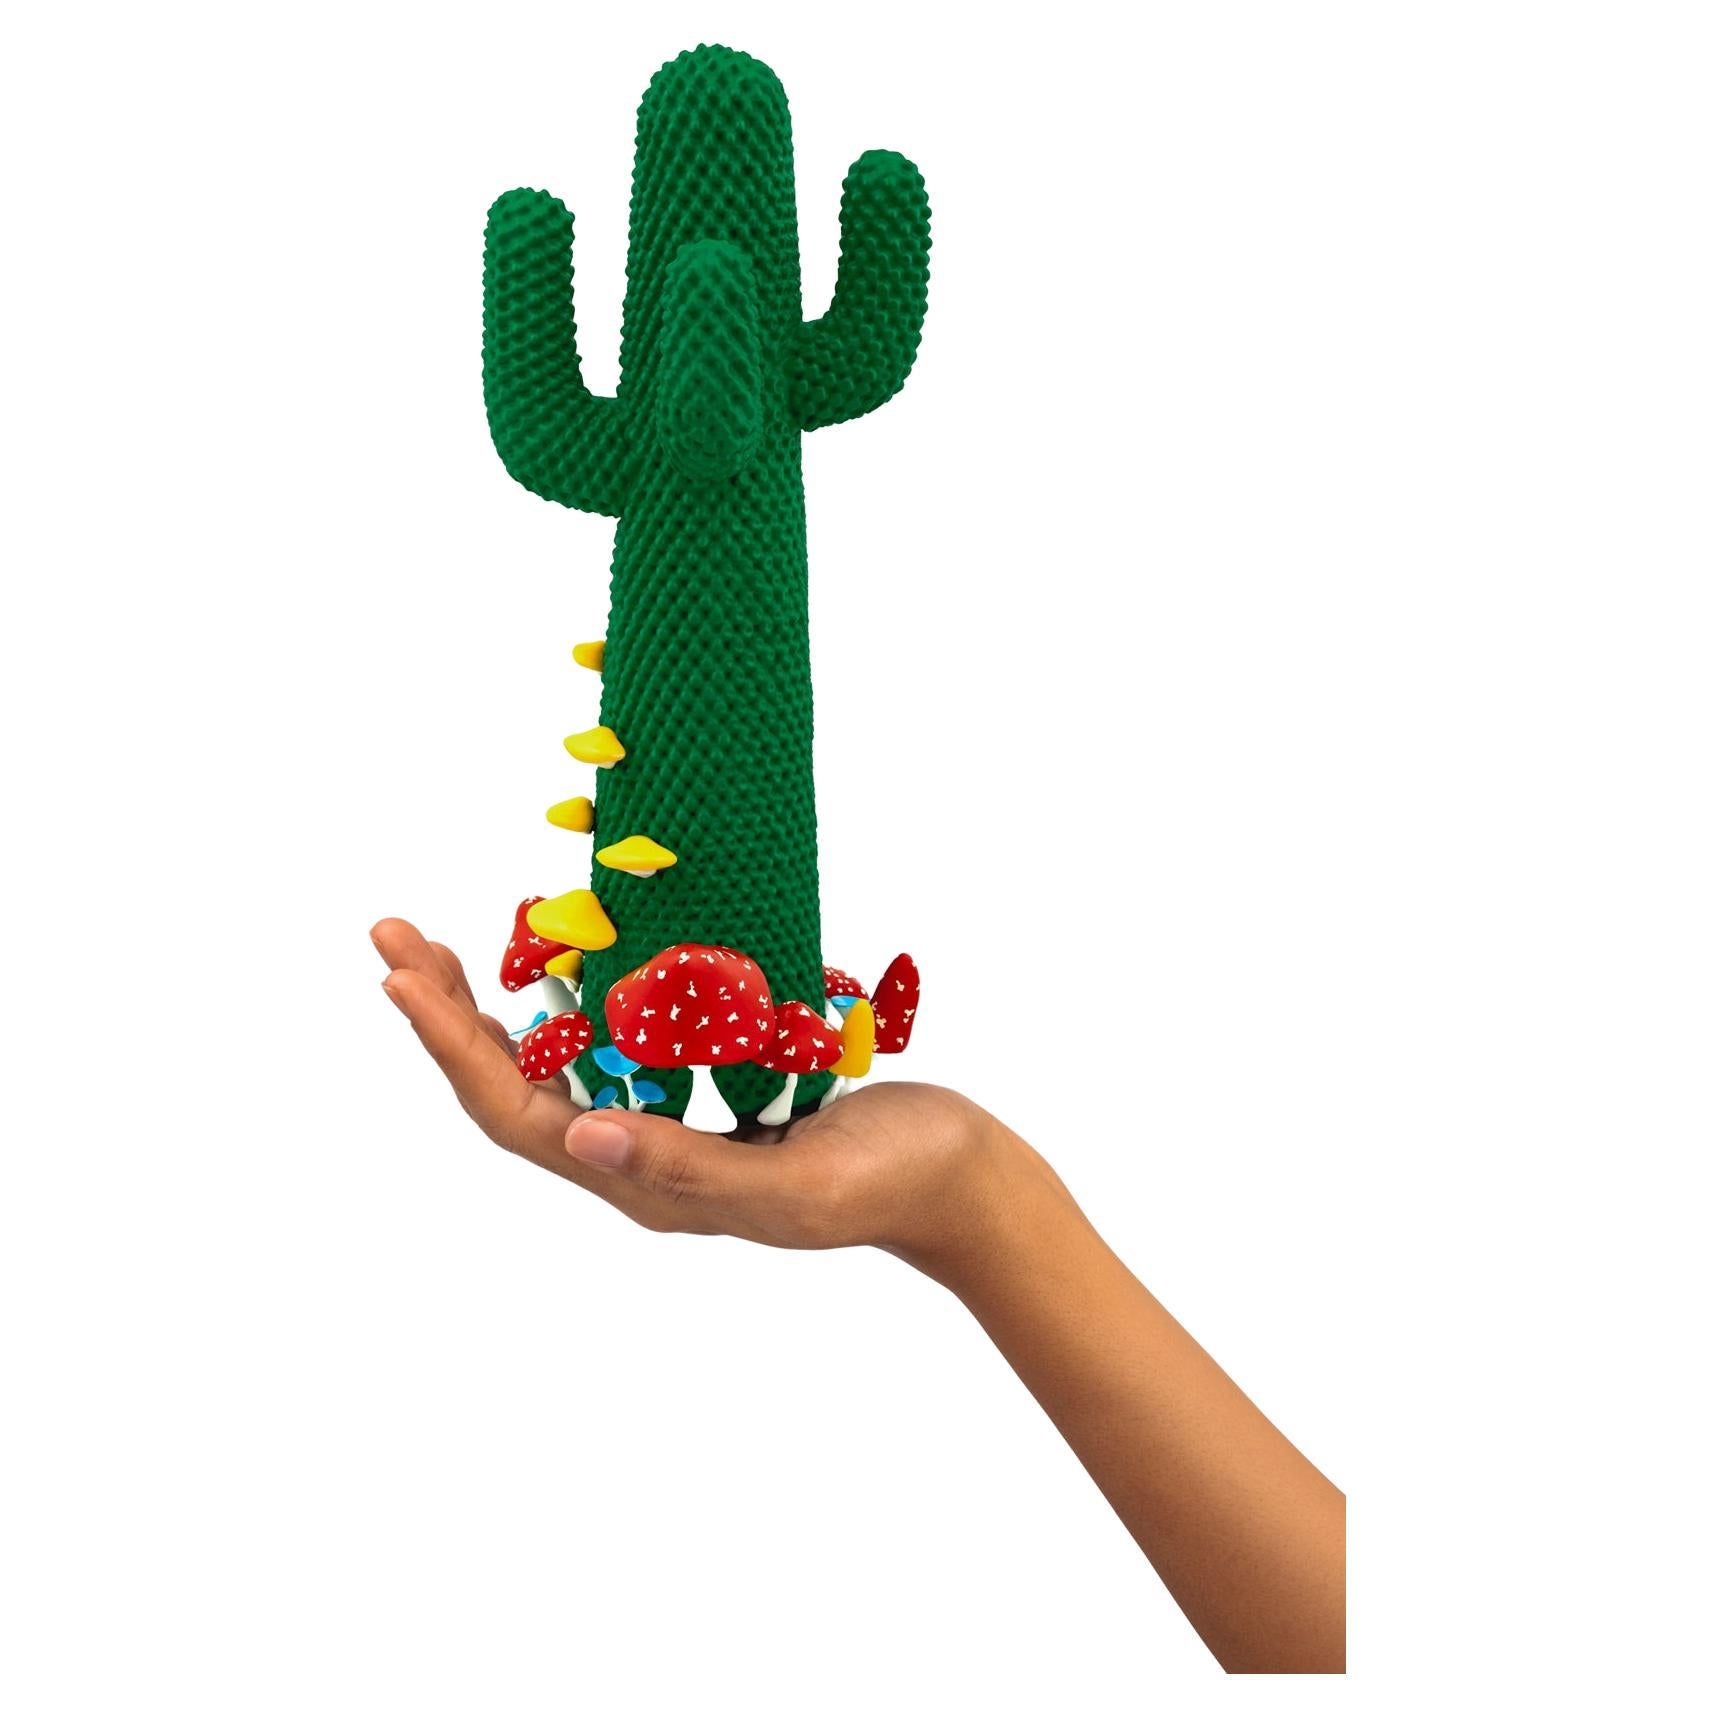 Limited edition #41/99

Gufram presents the miniaturised version of the Shroom CACTUS® created in collaboration with A$AP Rocky and the artist’s new design studio HOMMEMADE Exactly as the real-size Shroom CACTUS®, the new Guframini piece features